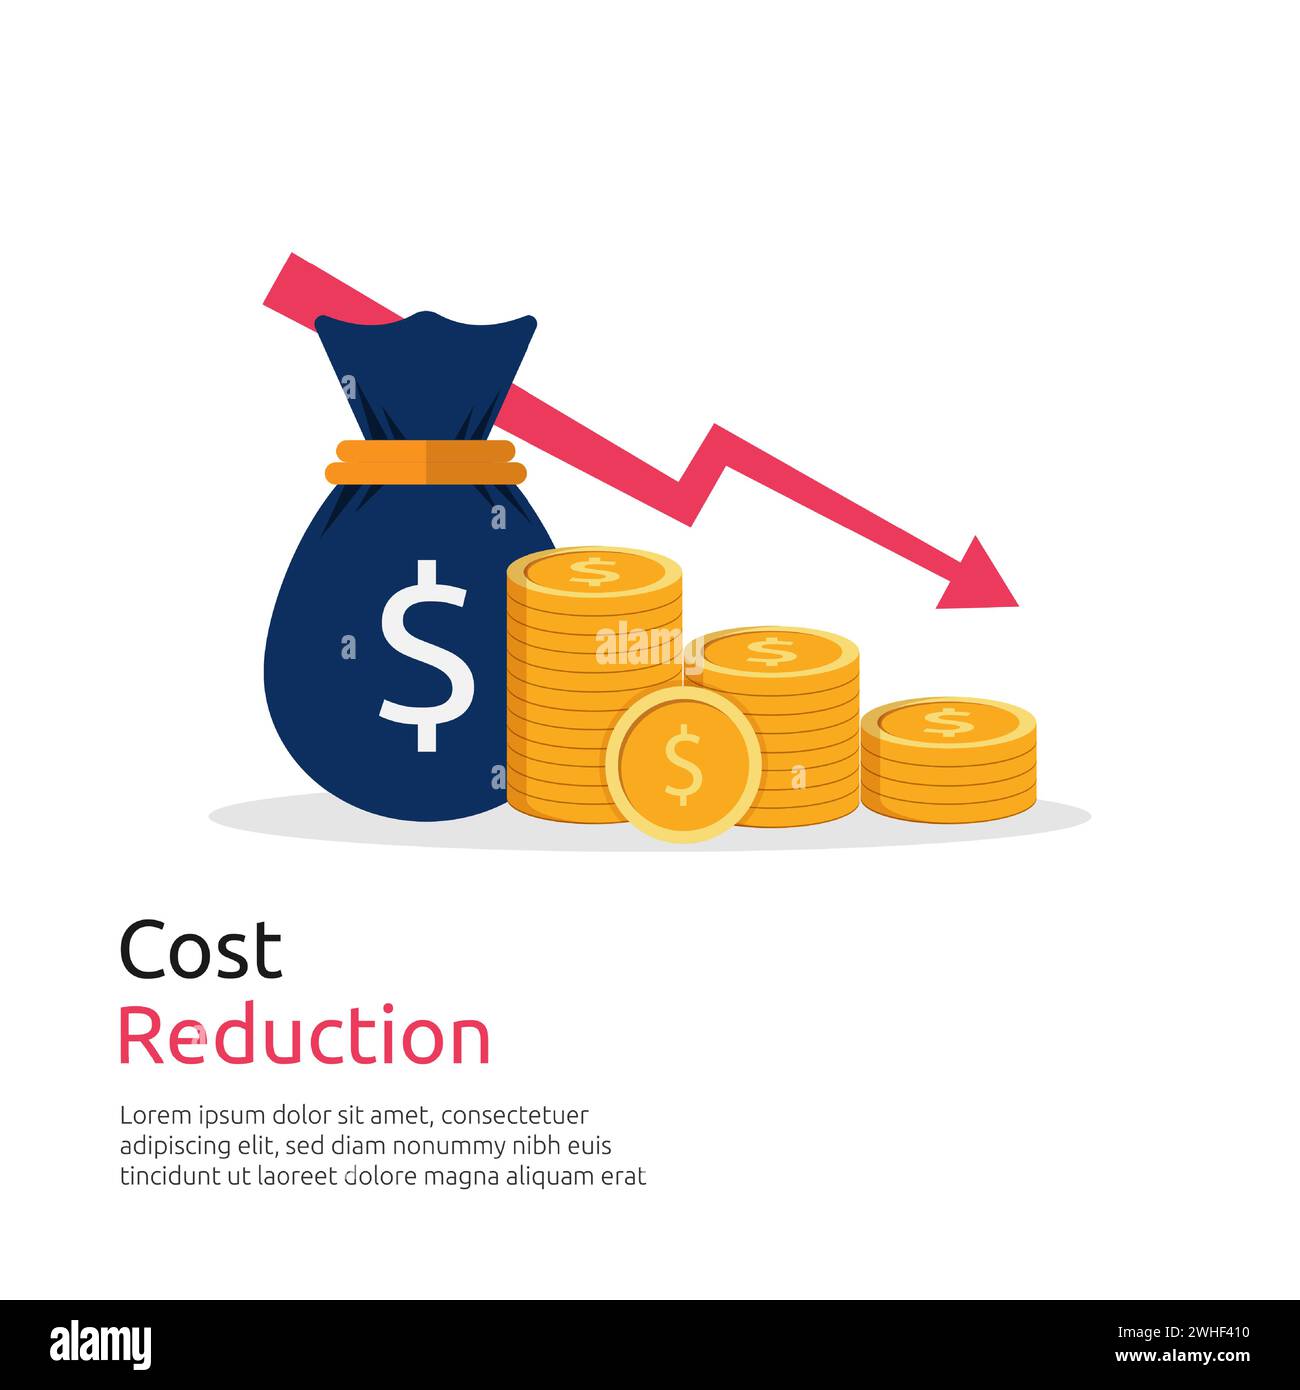 Costs reduction, costs cut, costs optimization business concept. Sack of money and coin stacks symbol with descending curve or arrow vector illustrati Stock Vector